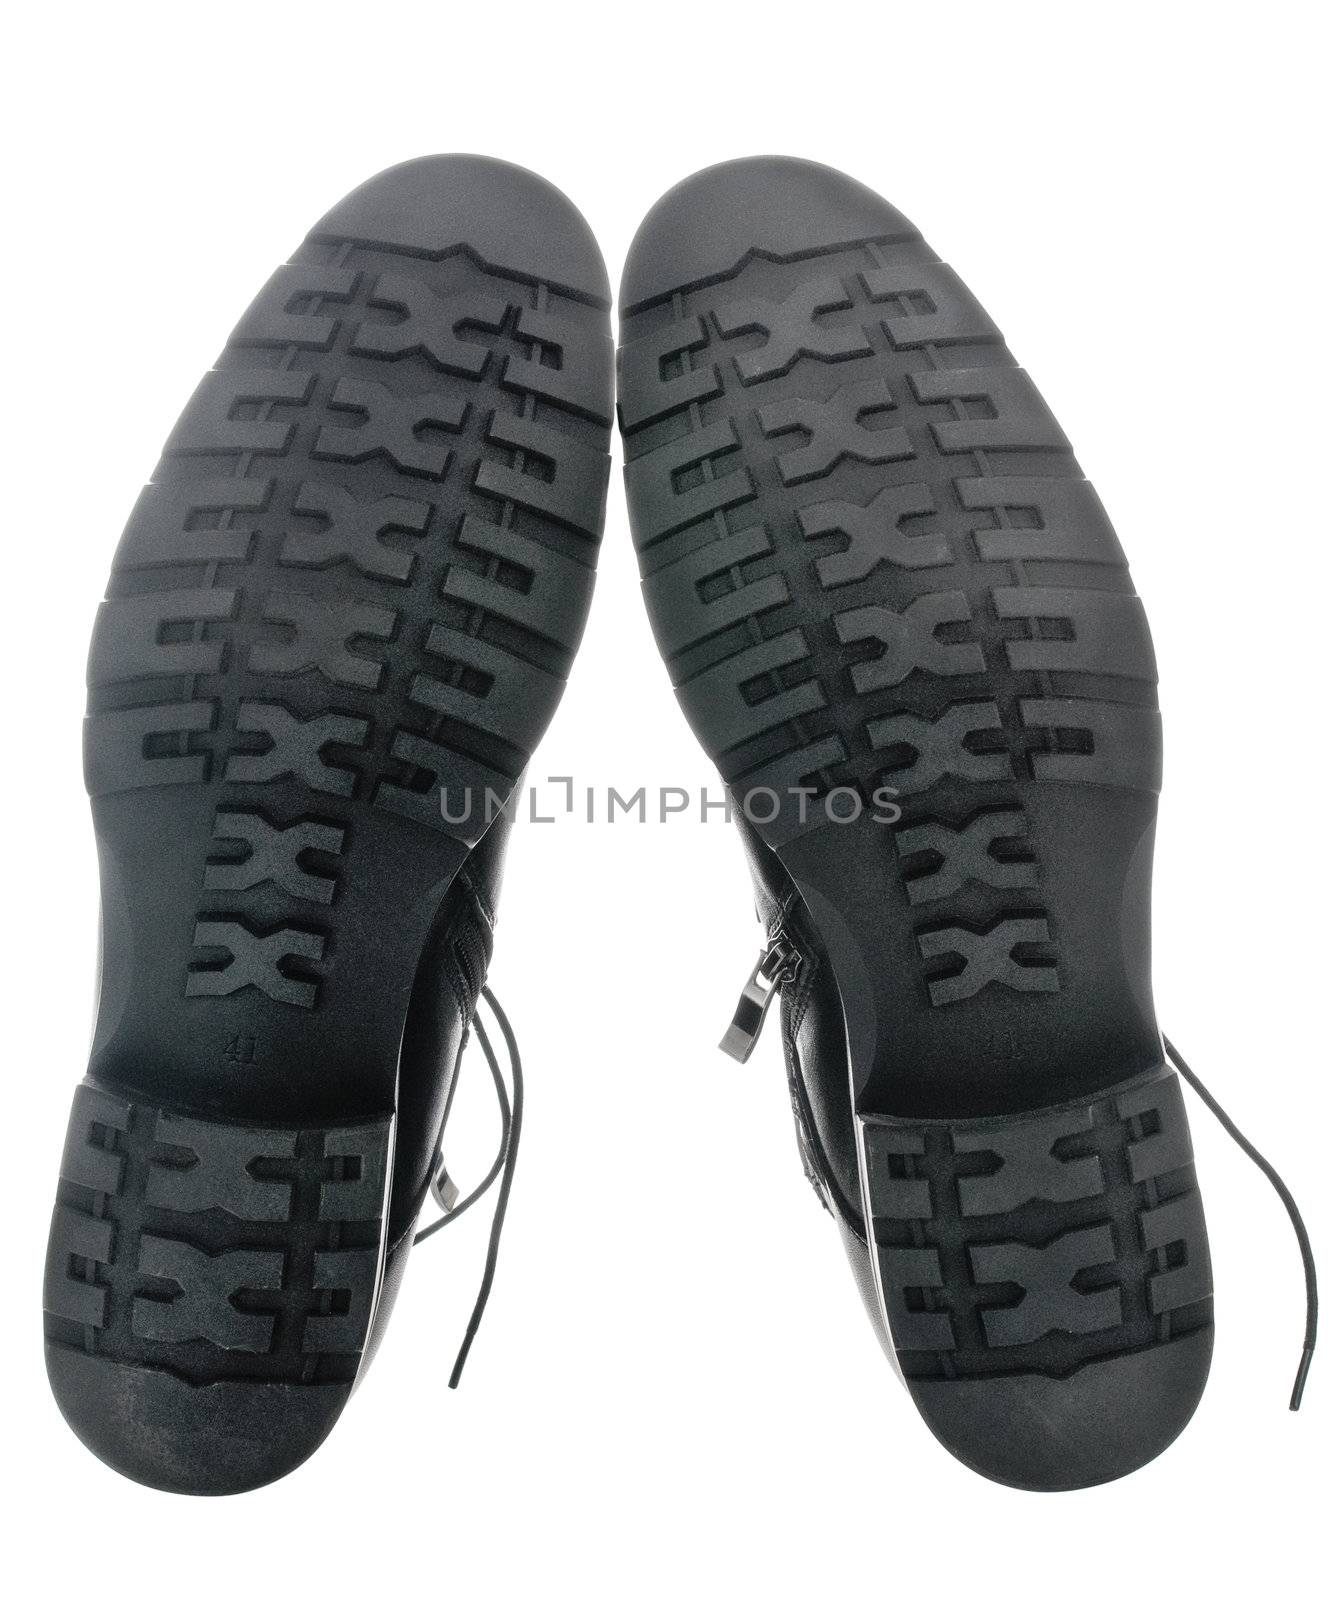 Black Men's leather shoes on a white background